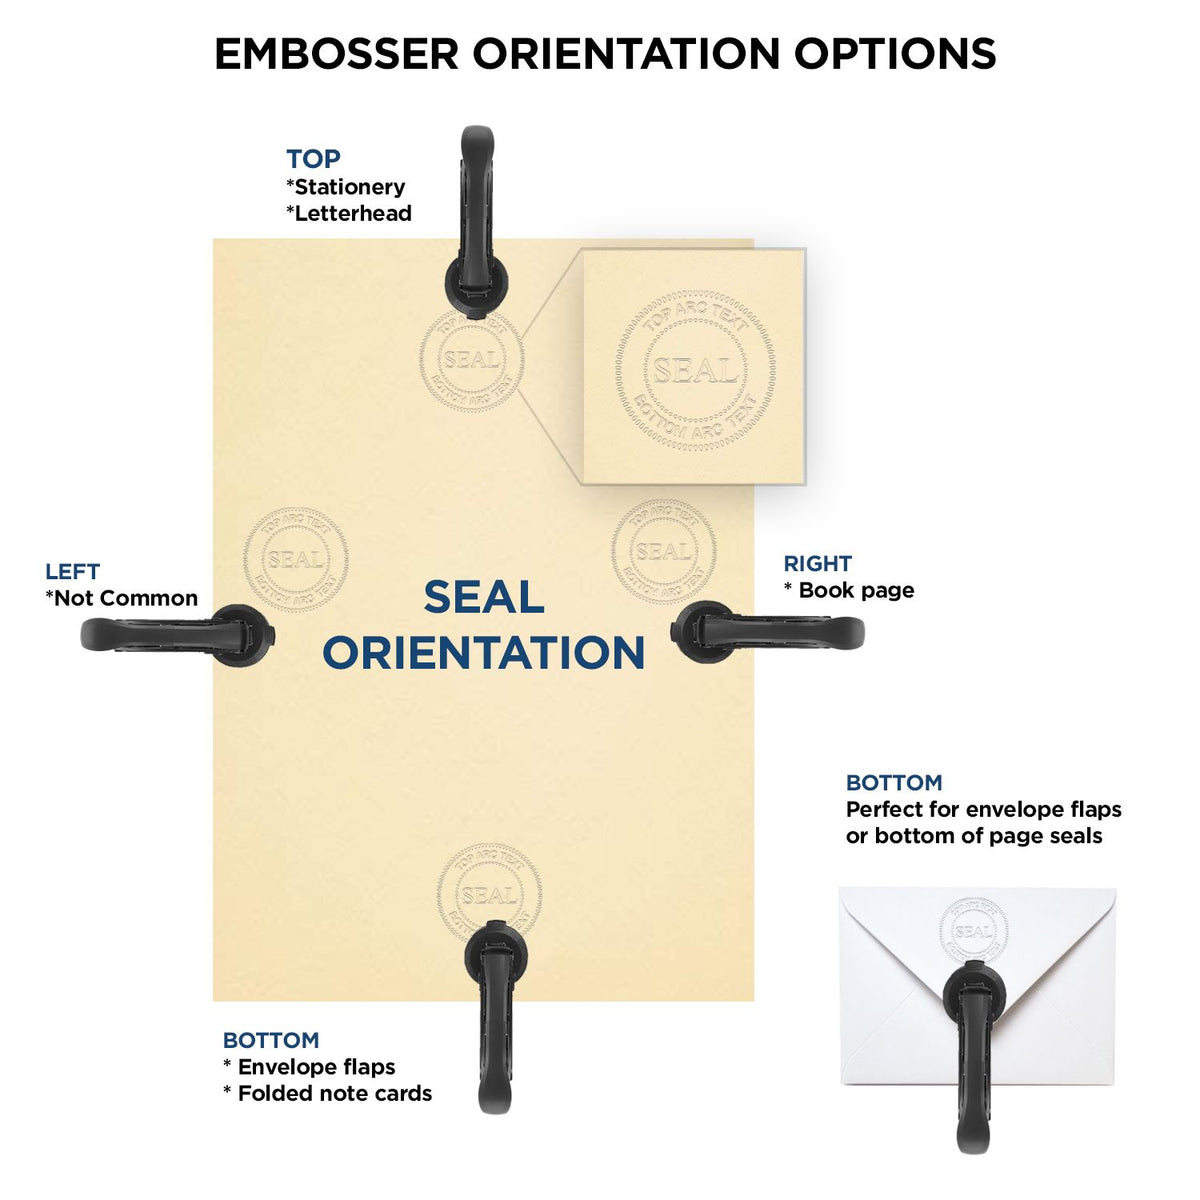 An infographic for the State of Ohio Soft Land Surveyor Embossing Seal showing embosser orientation, this is showing examples of a top, bottom, right and left insert.